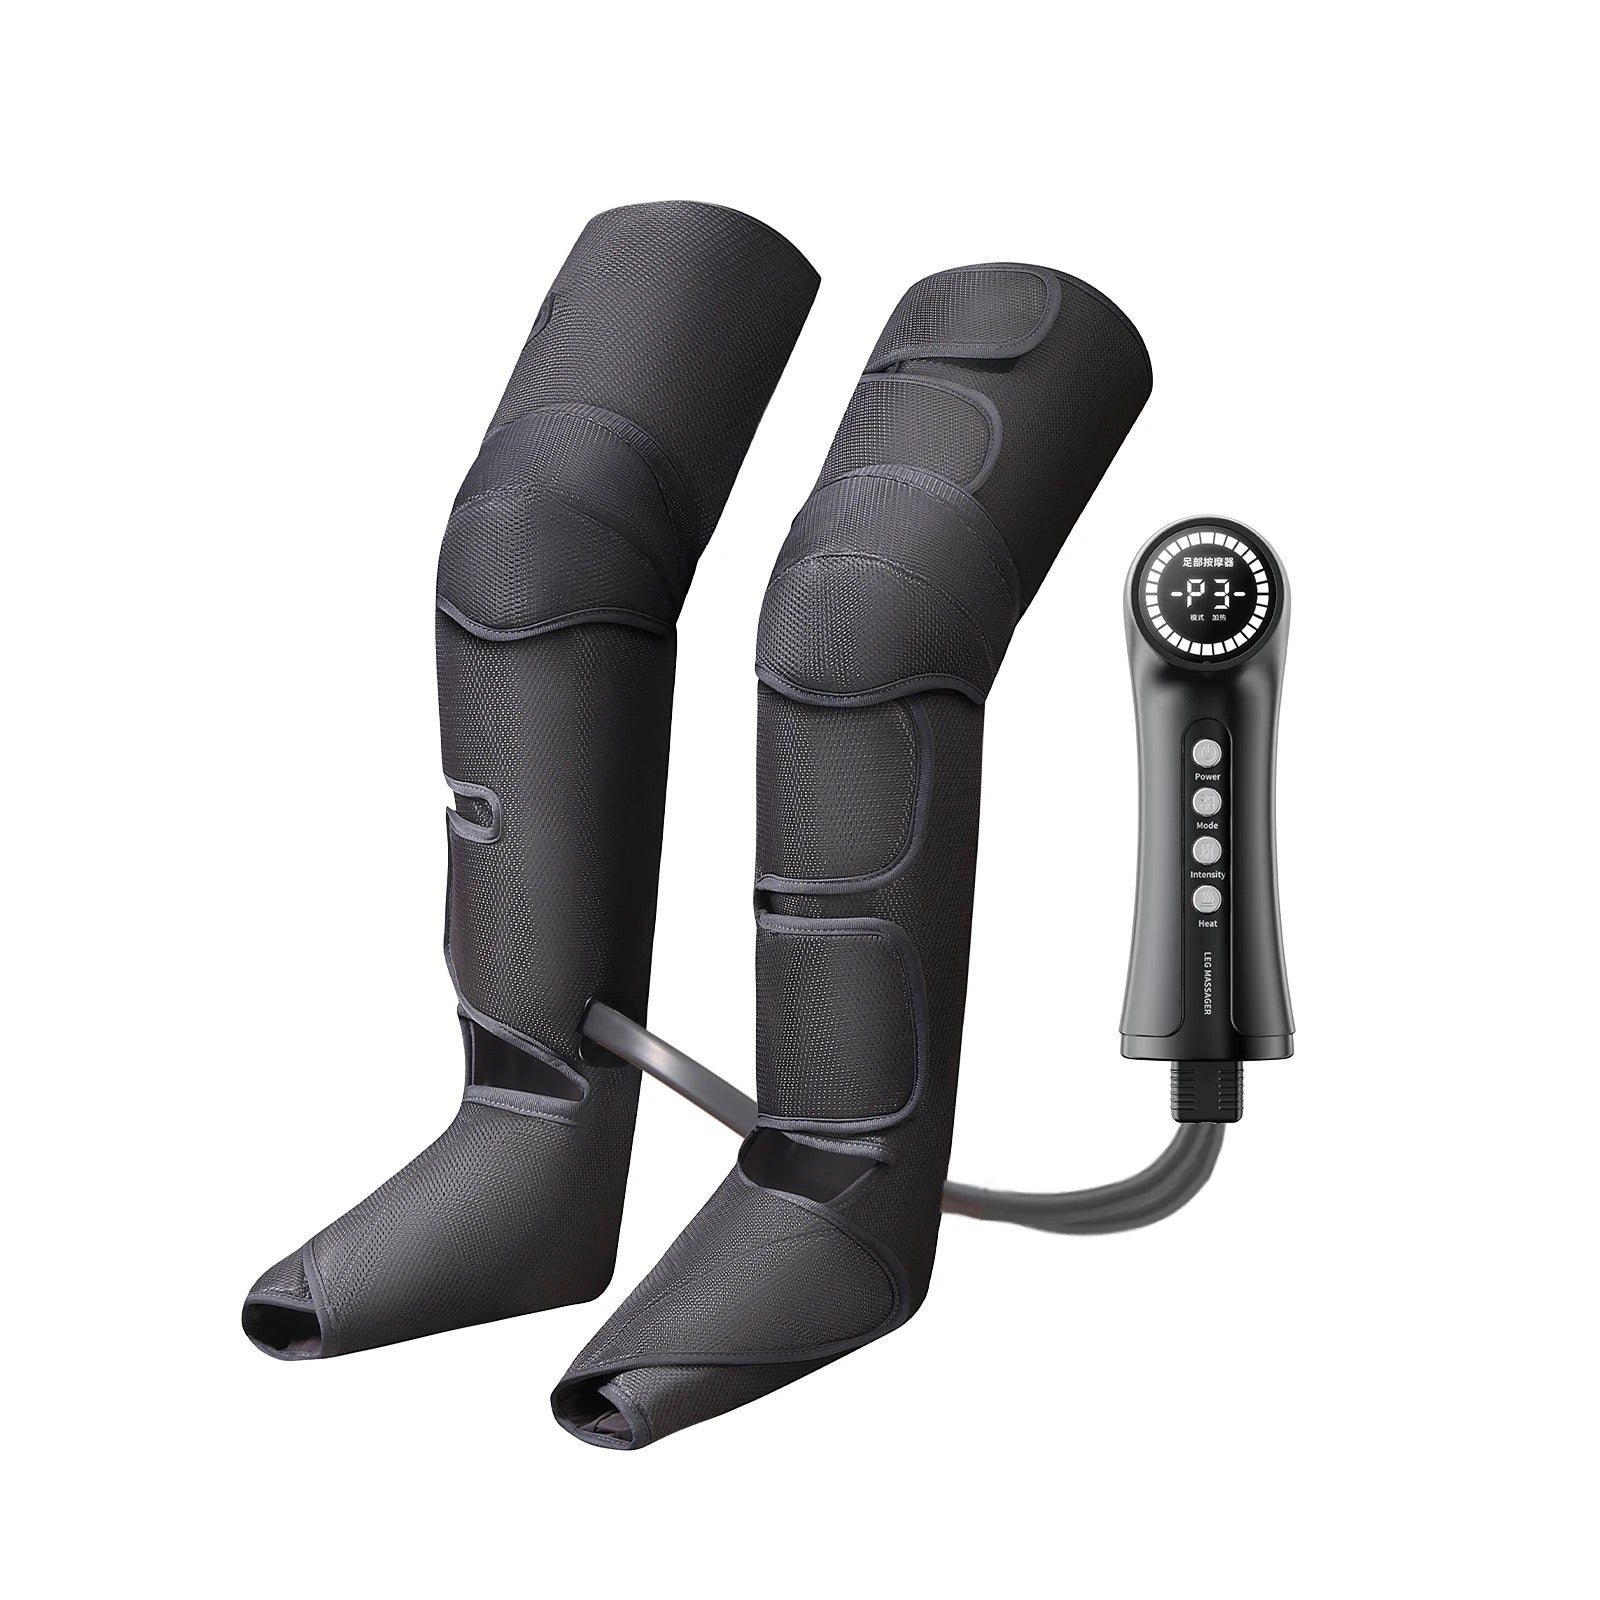 Compression therapy works by increasing blood flow and reducing swelling in the legs and feet, making it an effective treatment for a variety of conditions such as lymphedema, post operative swelling, venous insufficiency, and deep vein thrombosis. Includes hand held remote control with multiple compression level adjustments and varying heat temperature settings. 